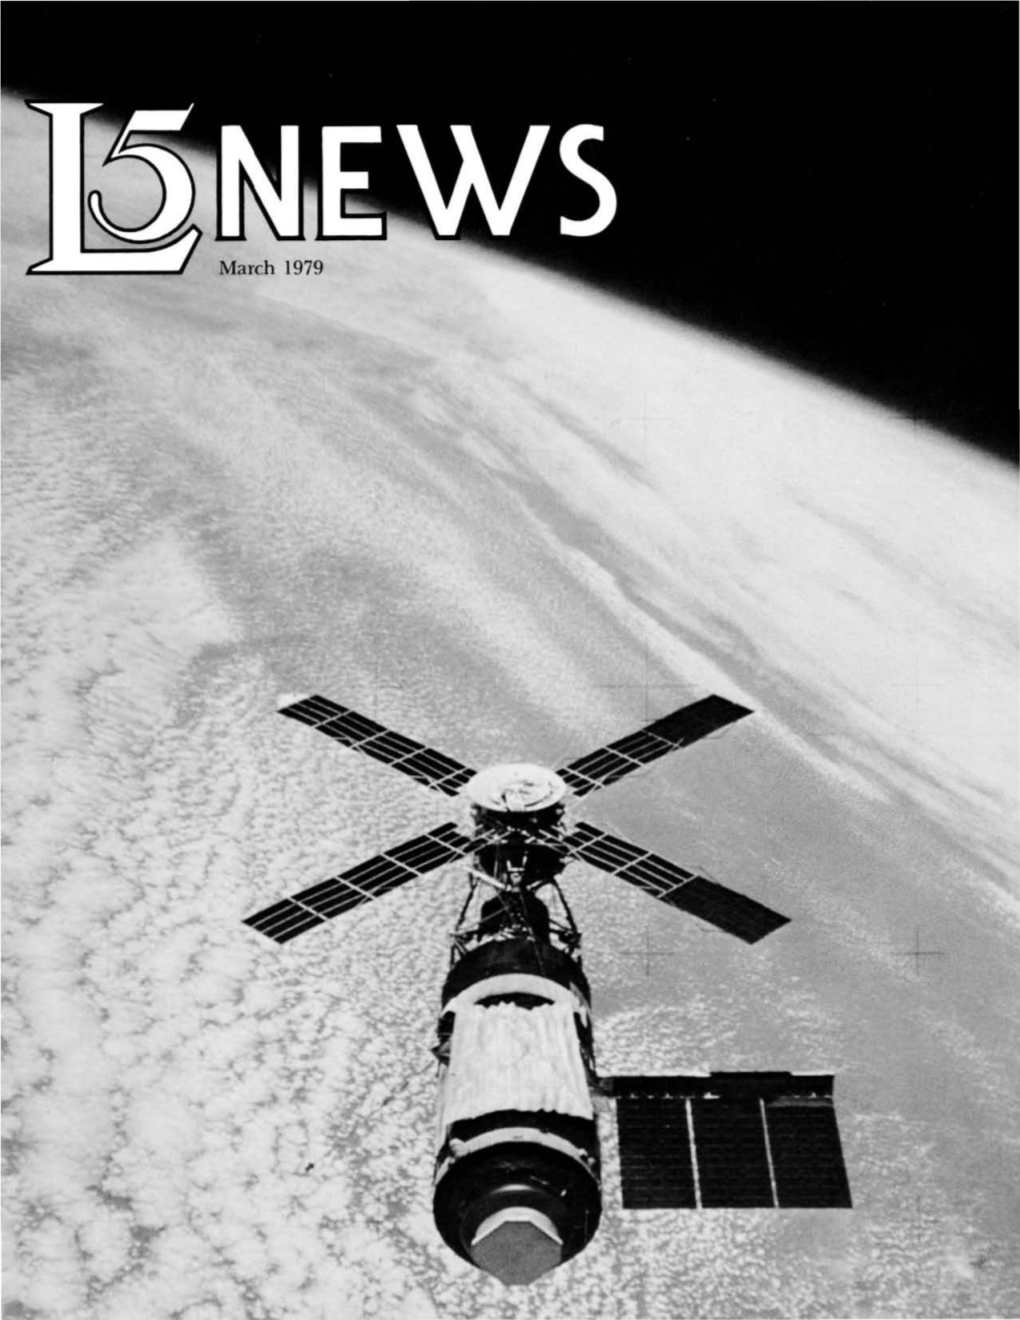 March 1979 L-5 NEWS a PUBLICATION of the L-5 SOCIETY VOL